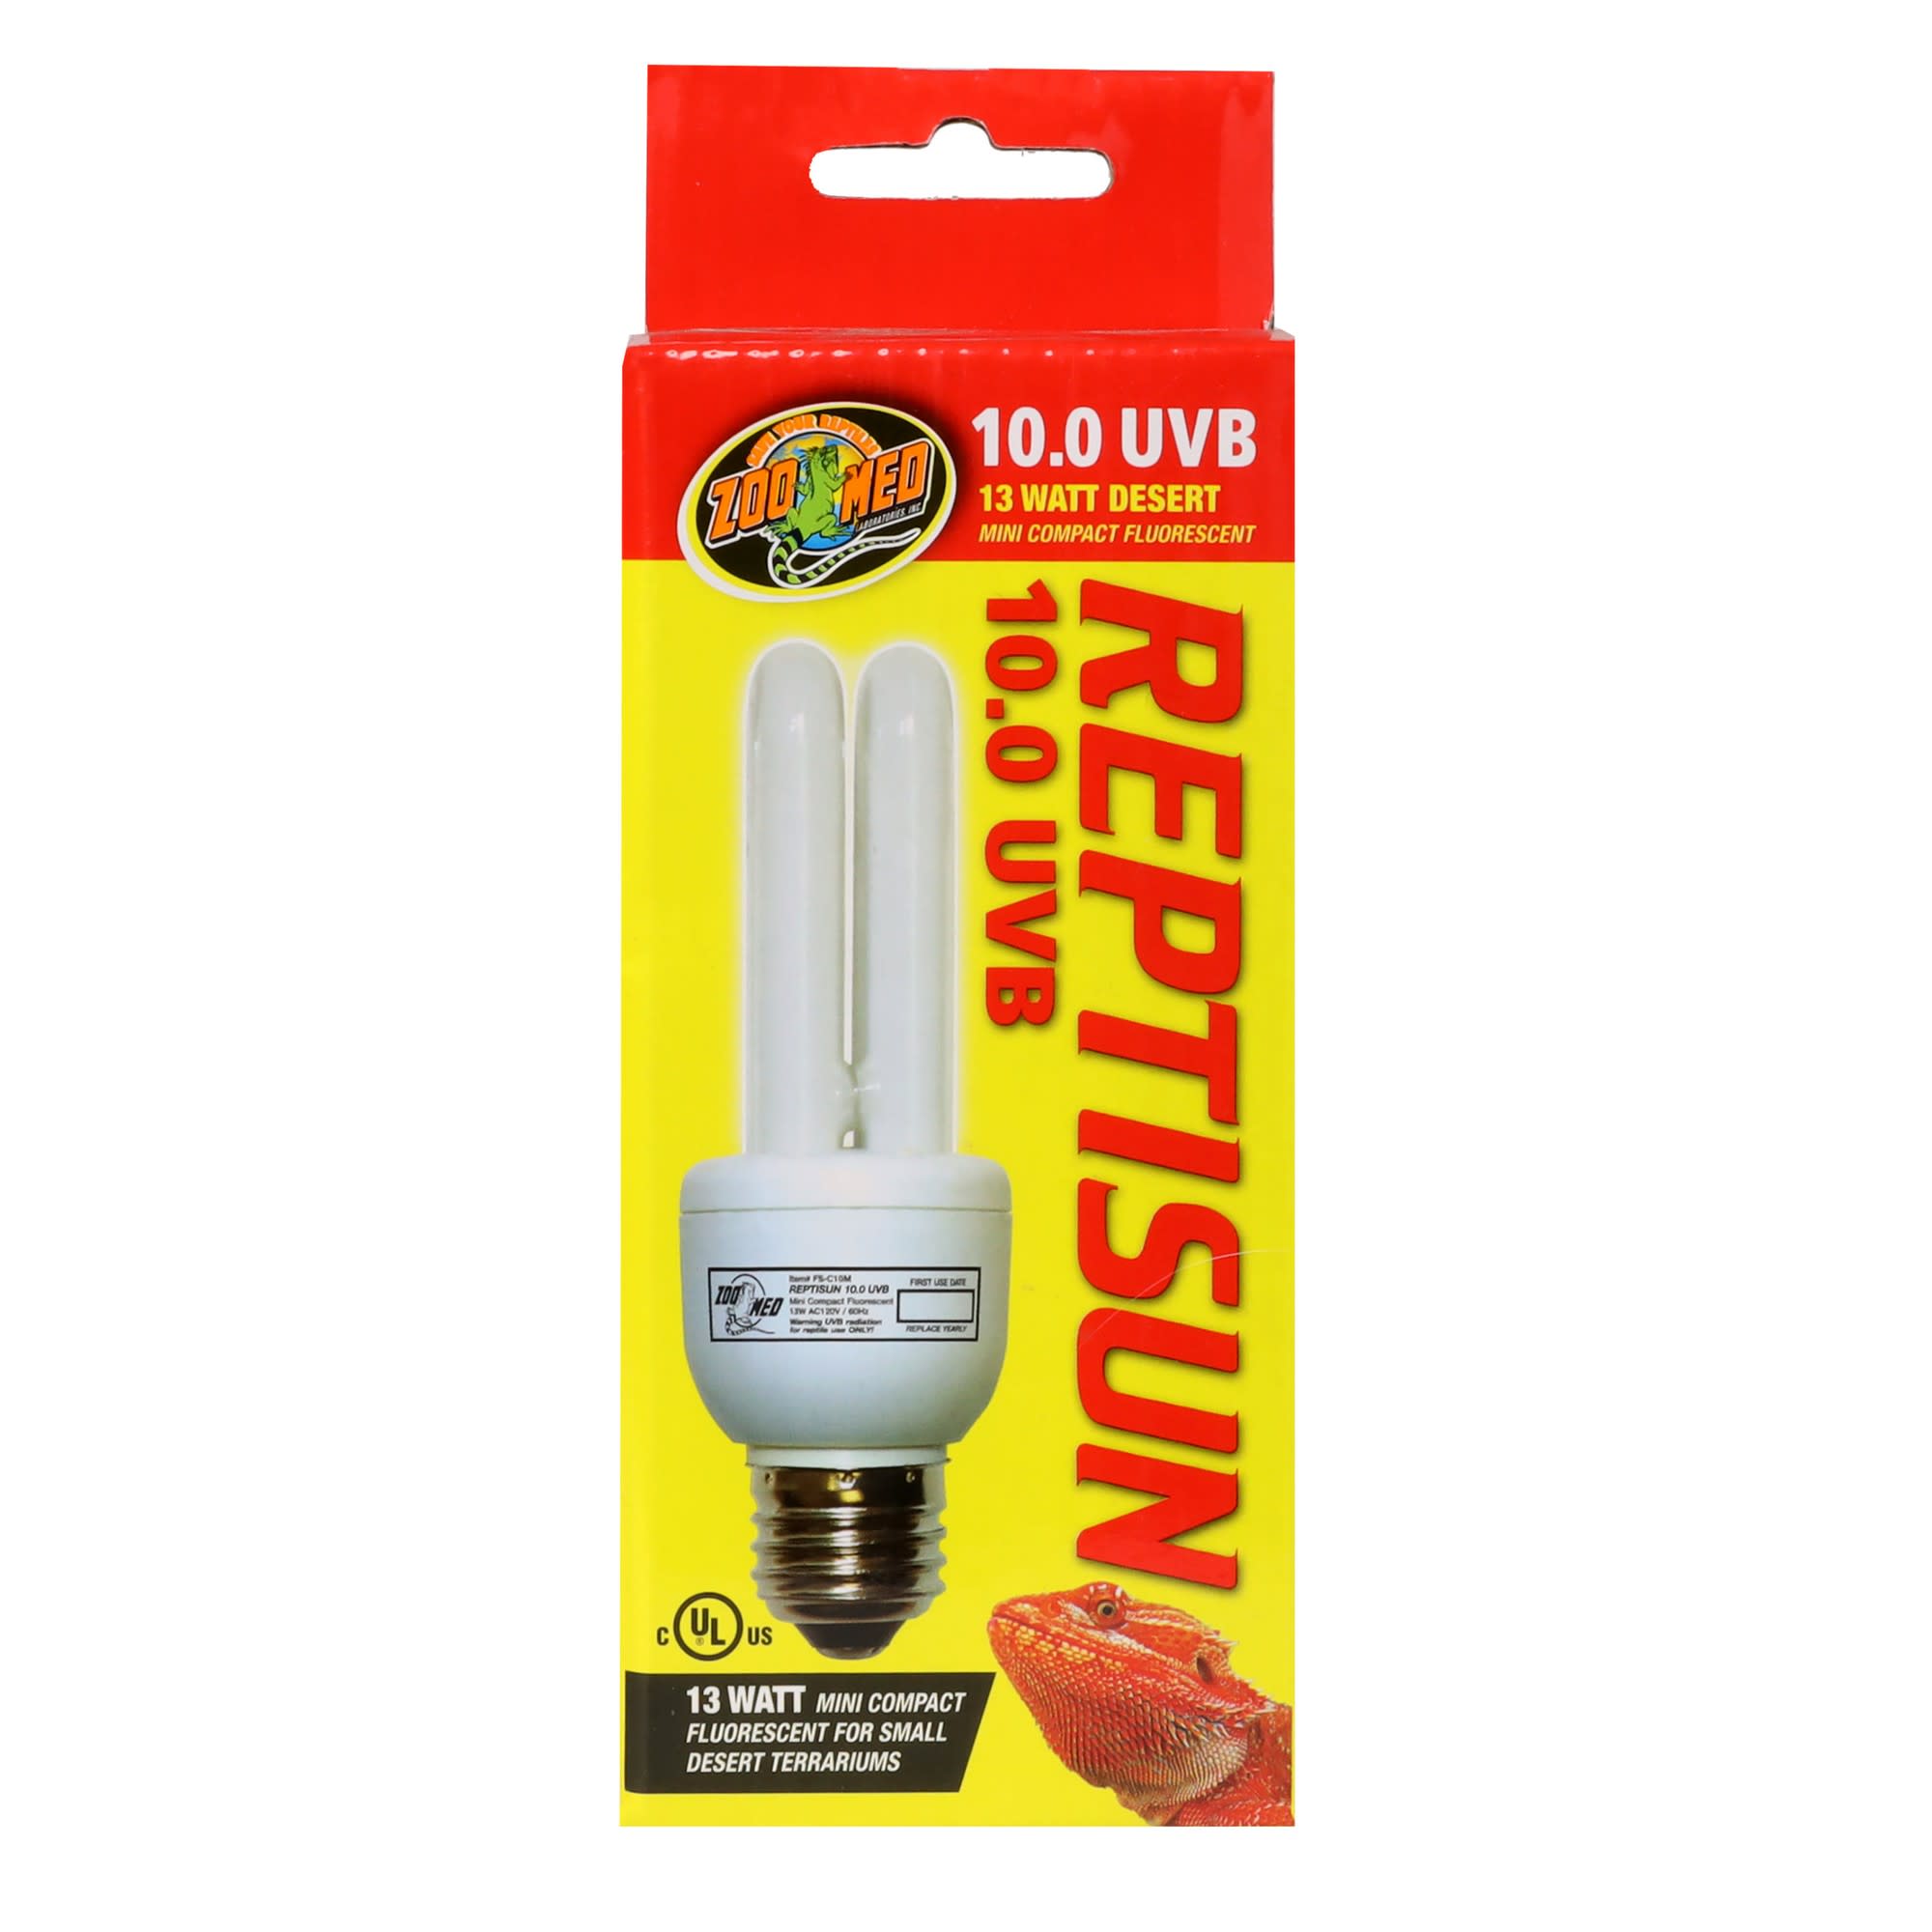 Photos - Other for Aquariums Zoo Med ReptiSun 10.0 Mini Compact Fluorescent Lamp, 13 Watts FS-C 